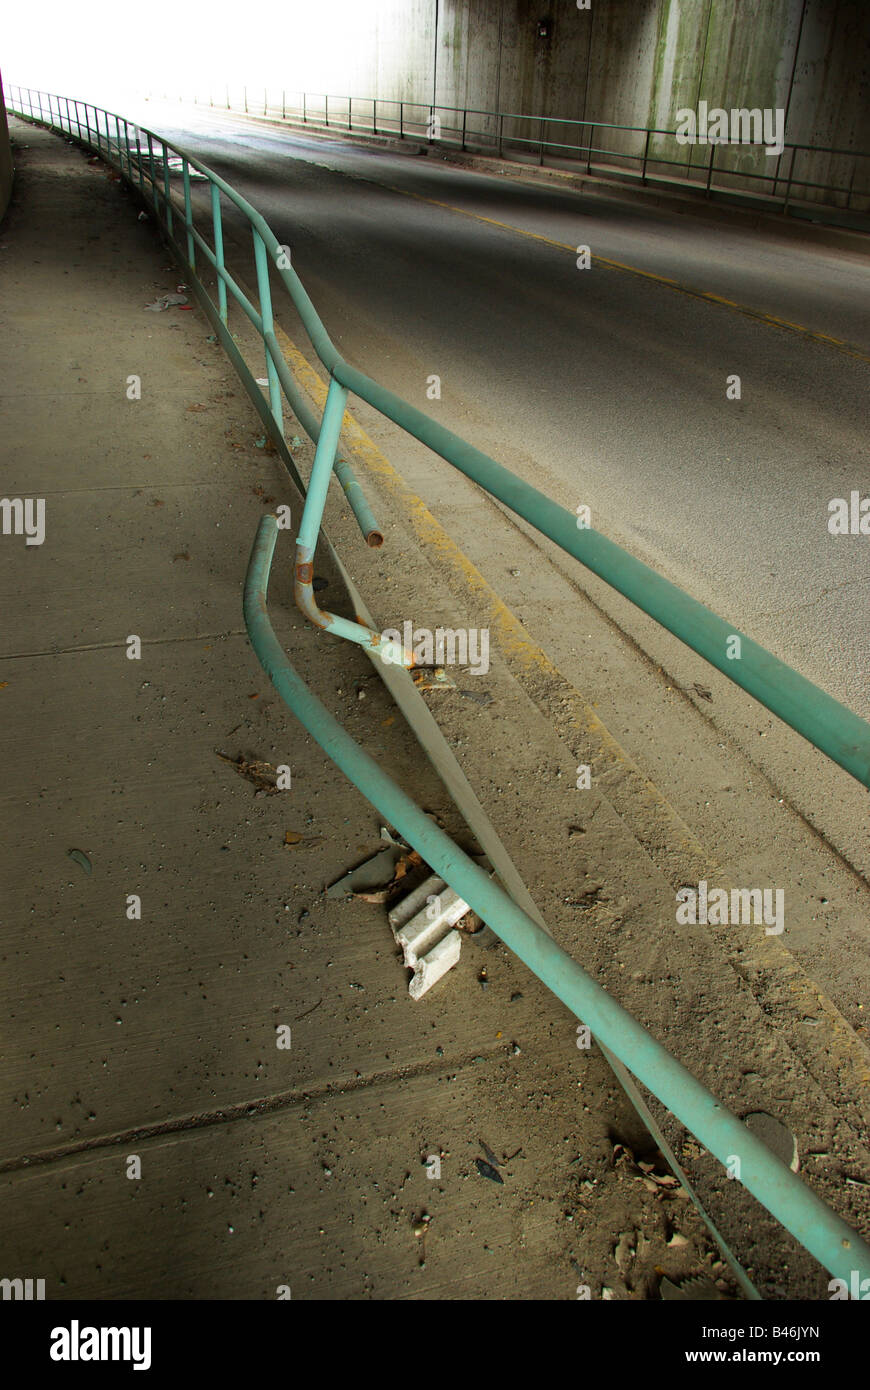 Damage to a railing on a pedestrian area under a railroad bridge from a car accident Stock Photo